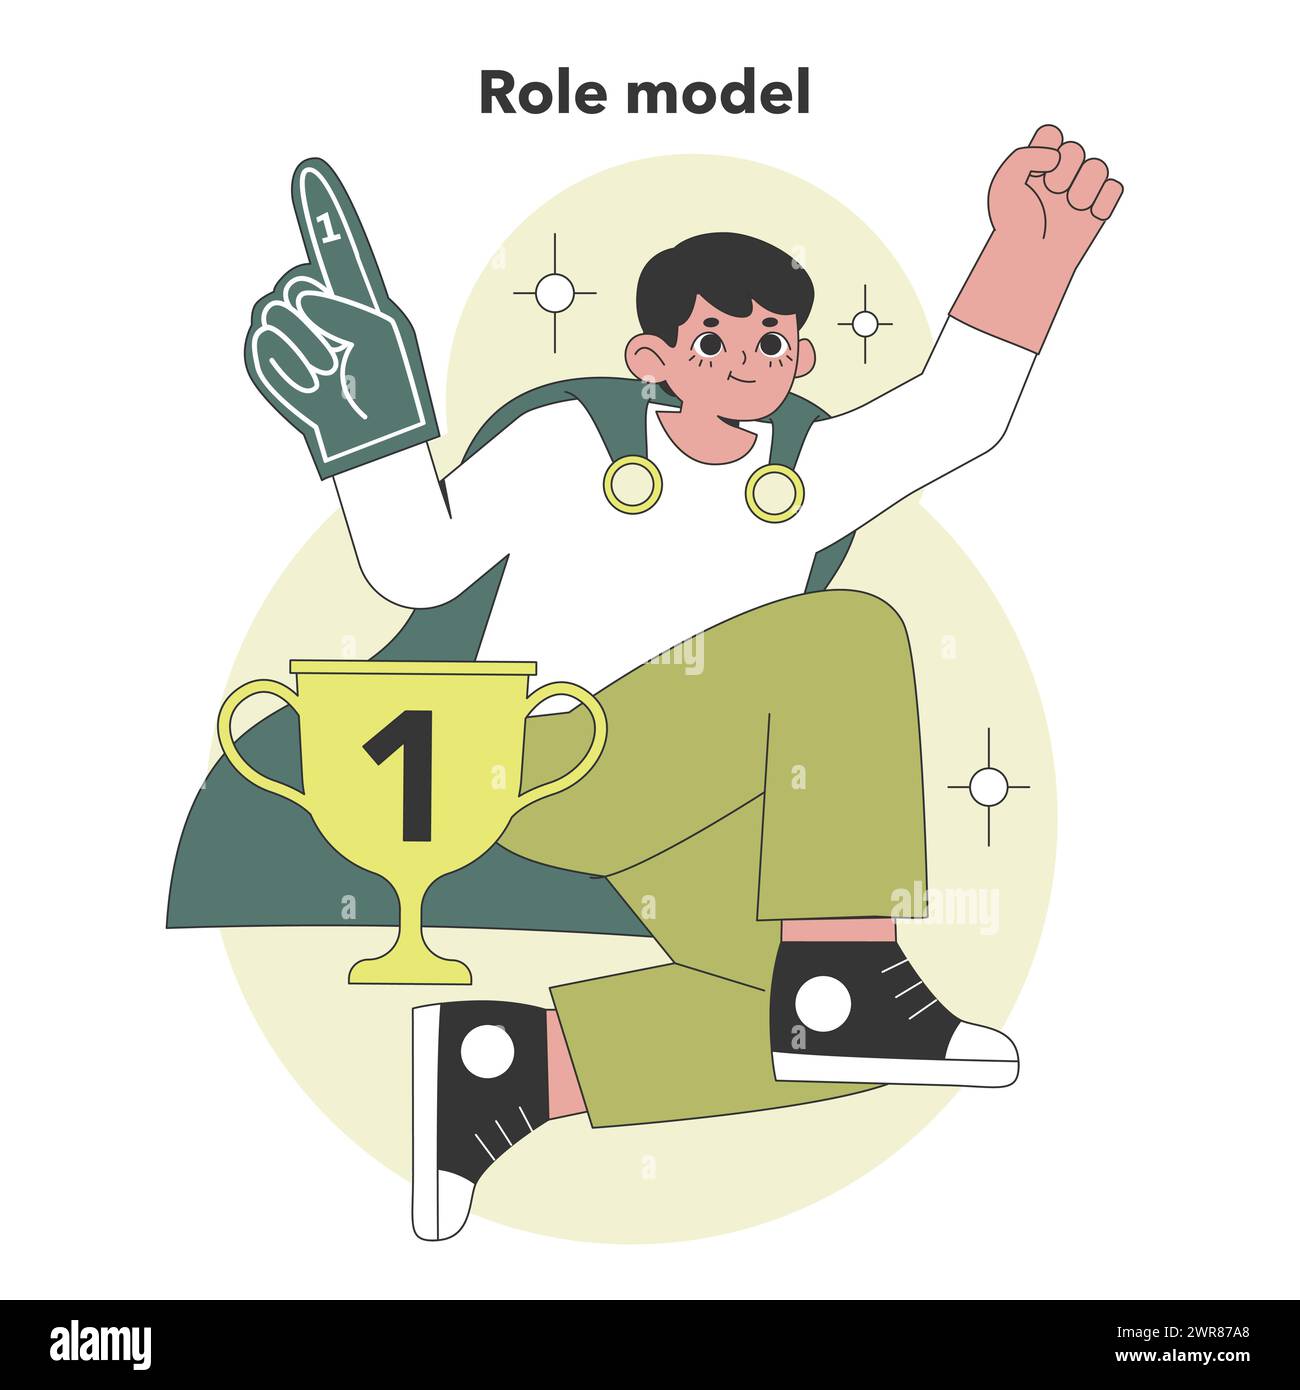 Role model personality showcased in Big Five. An inspirational figure celebrating success and leadership qualities. Flat vector illustration. Stock Vector